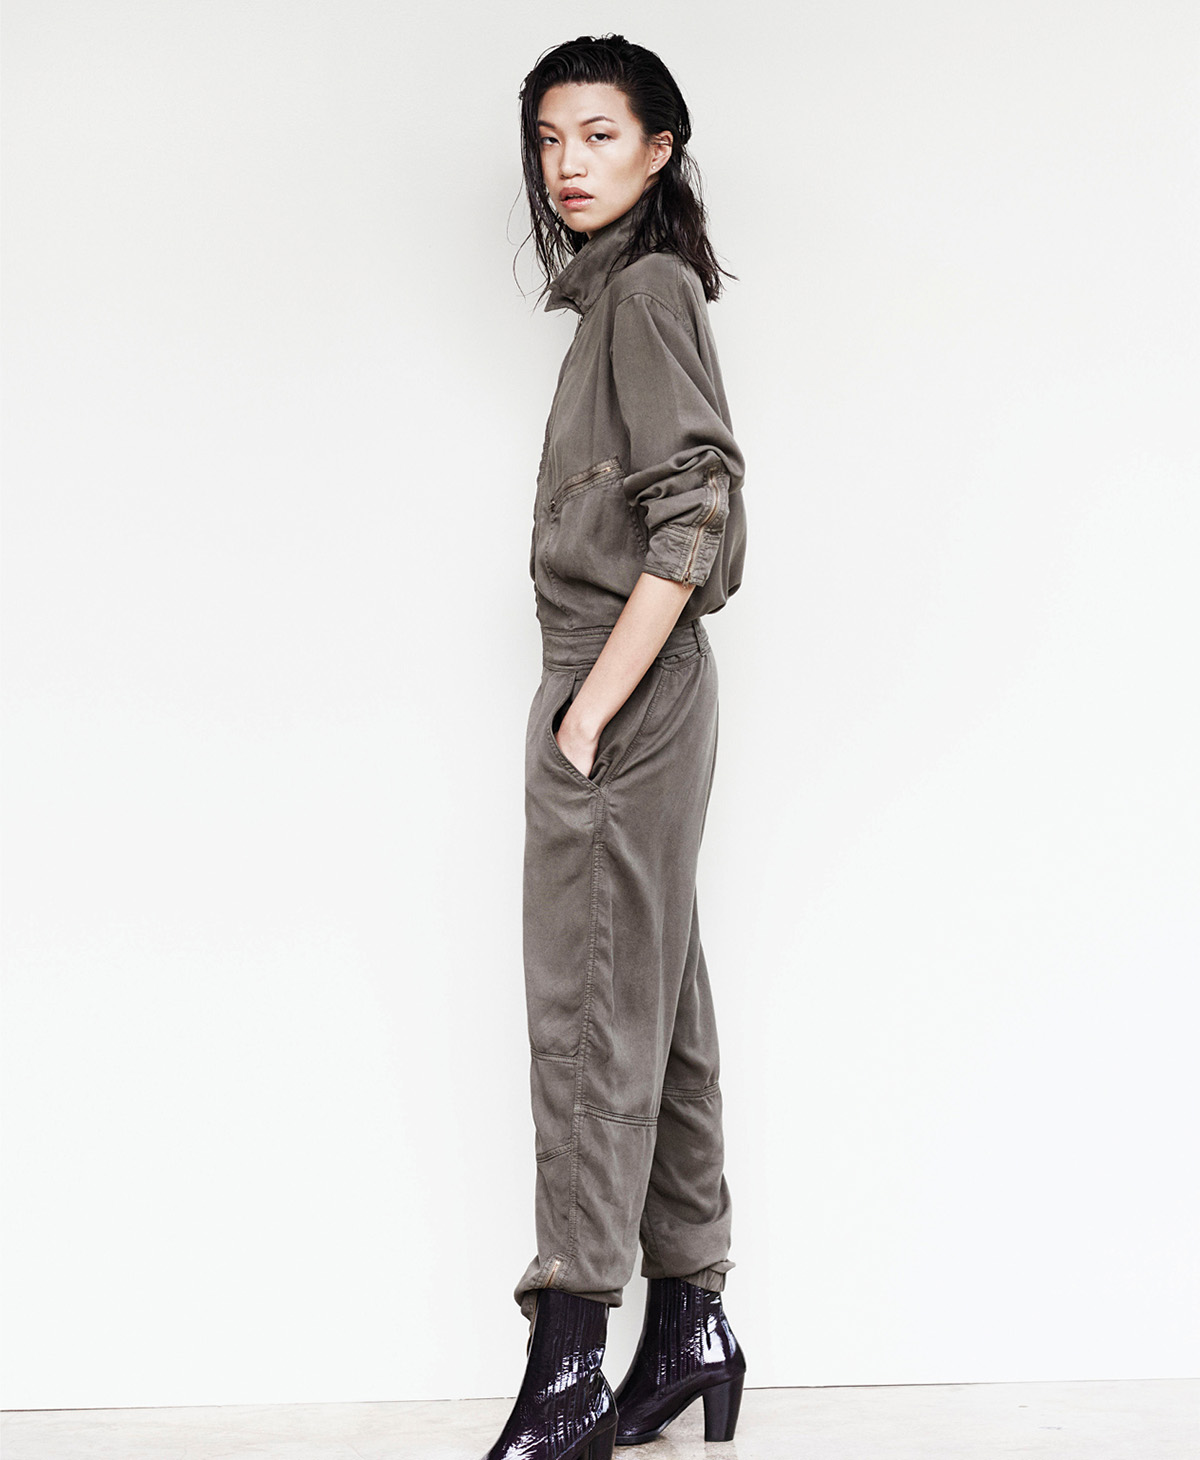 paola airforce jump suit